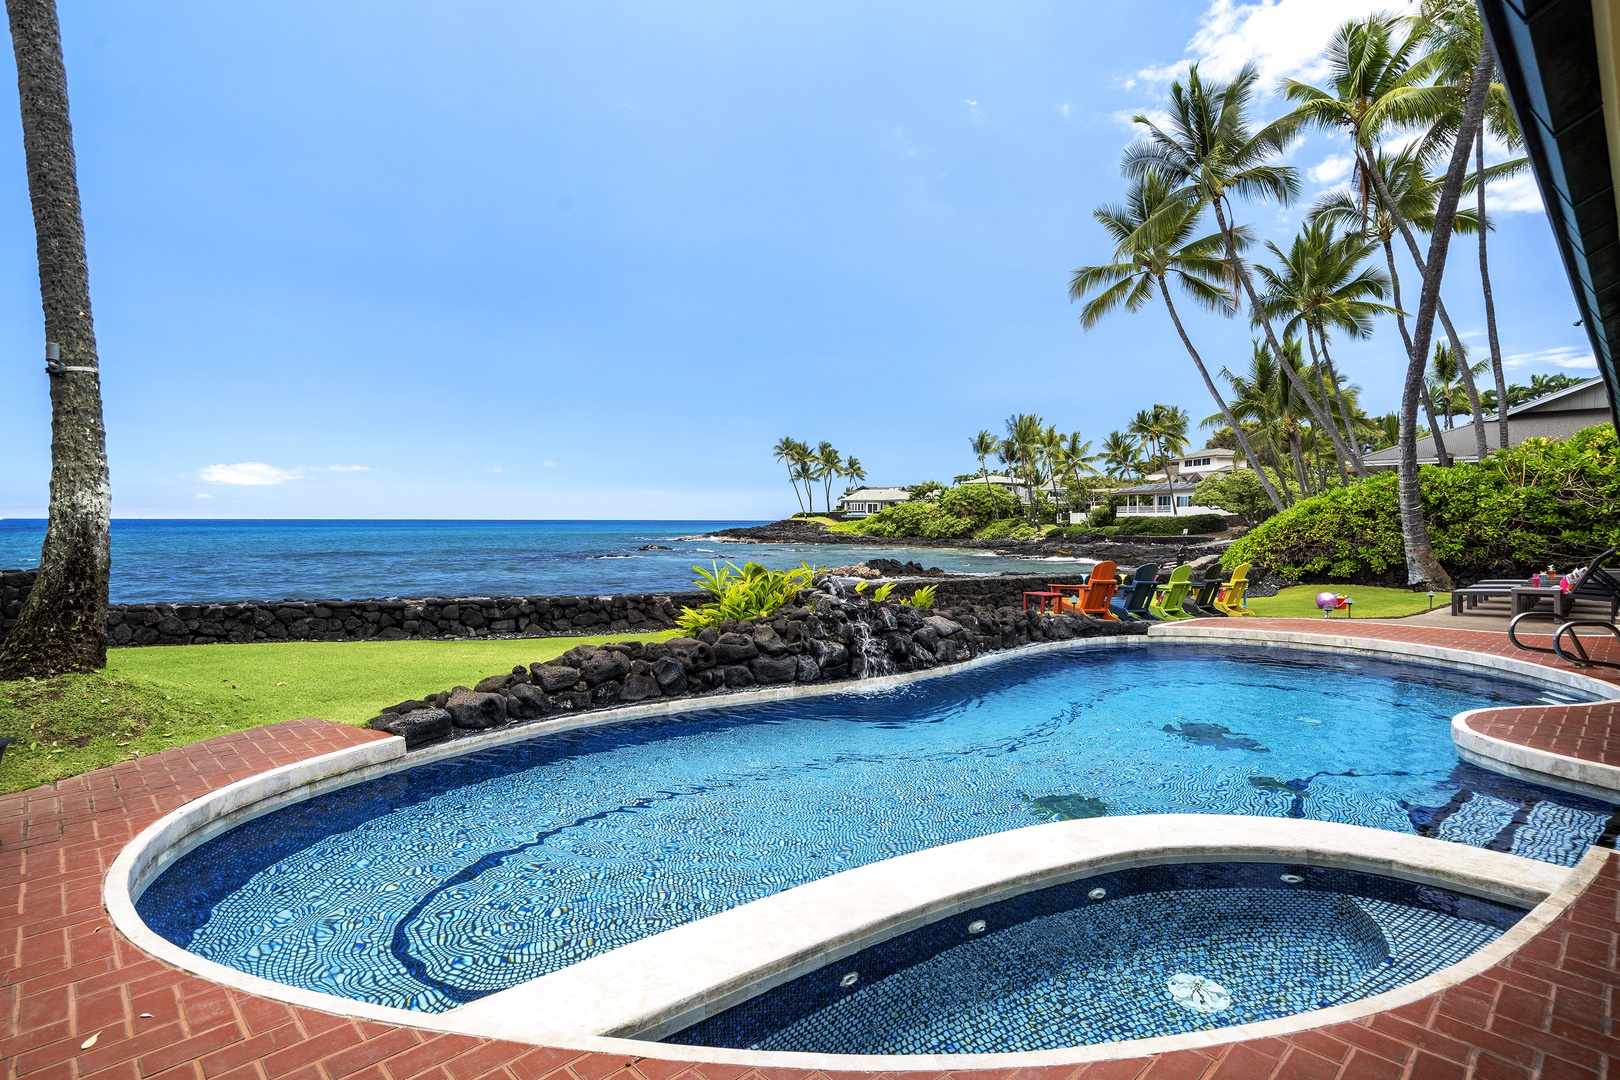 Kailua Kona Vacation Rentals, Hale Pua - Hard to imagine a better place to be than in your very own private pool at the waters edge